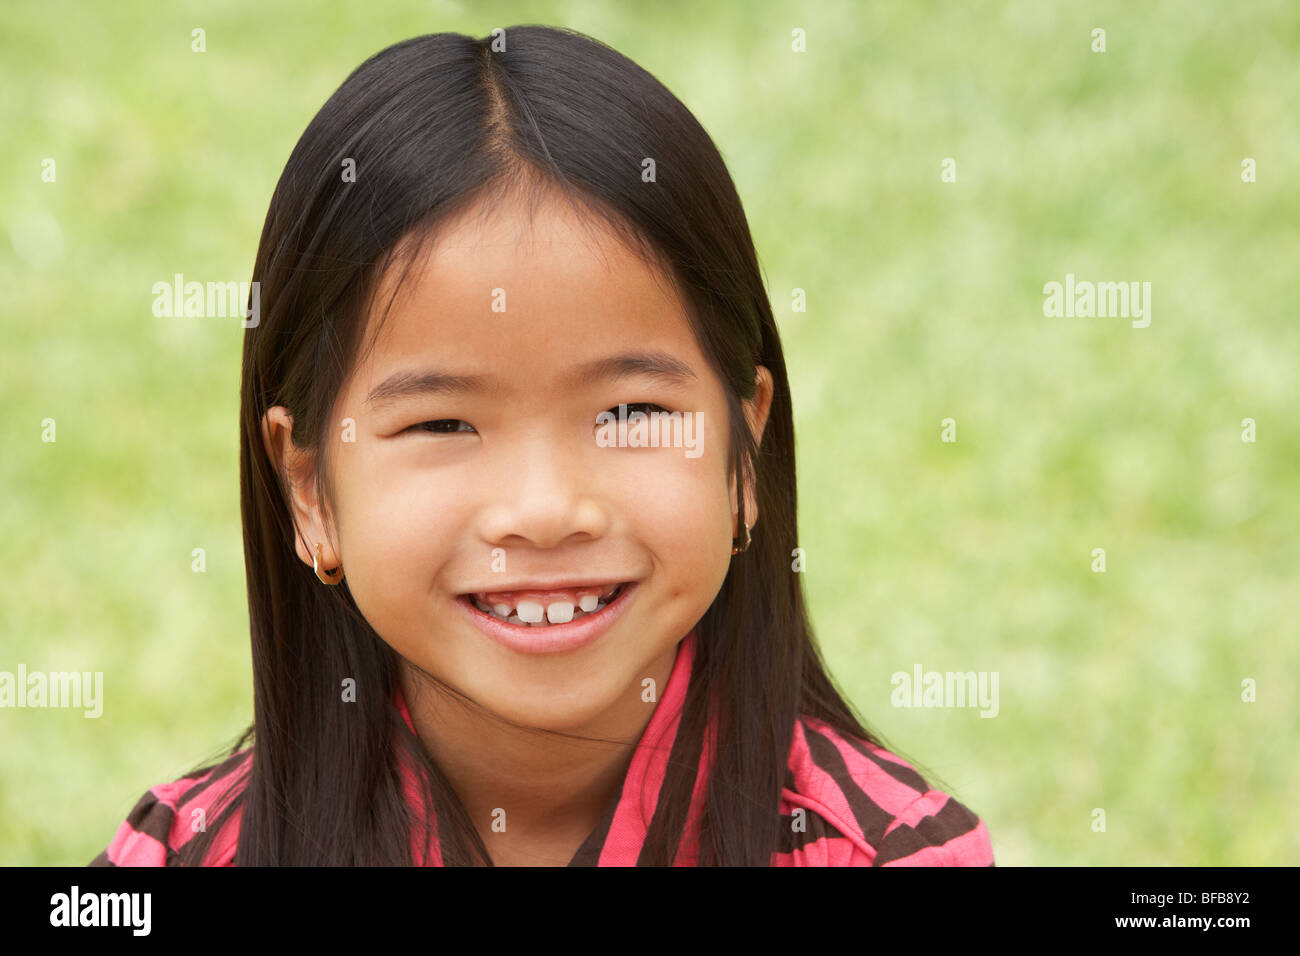 Portait Of Smiling Young Girl Outdoors Stock Photo